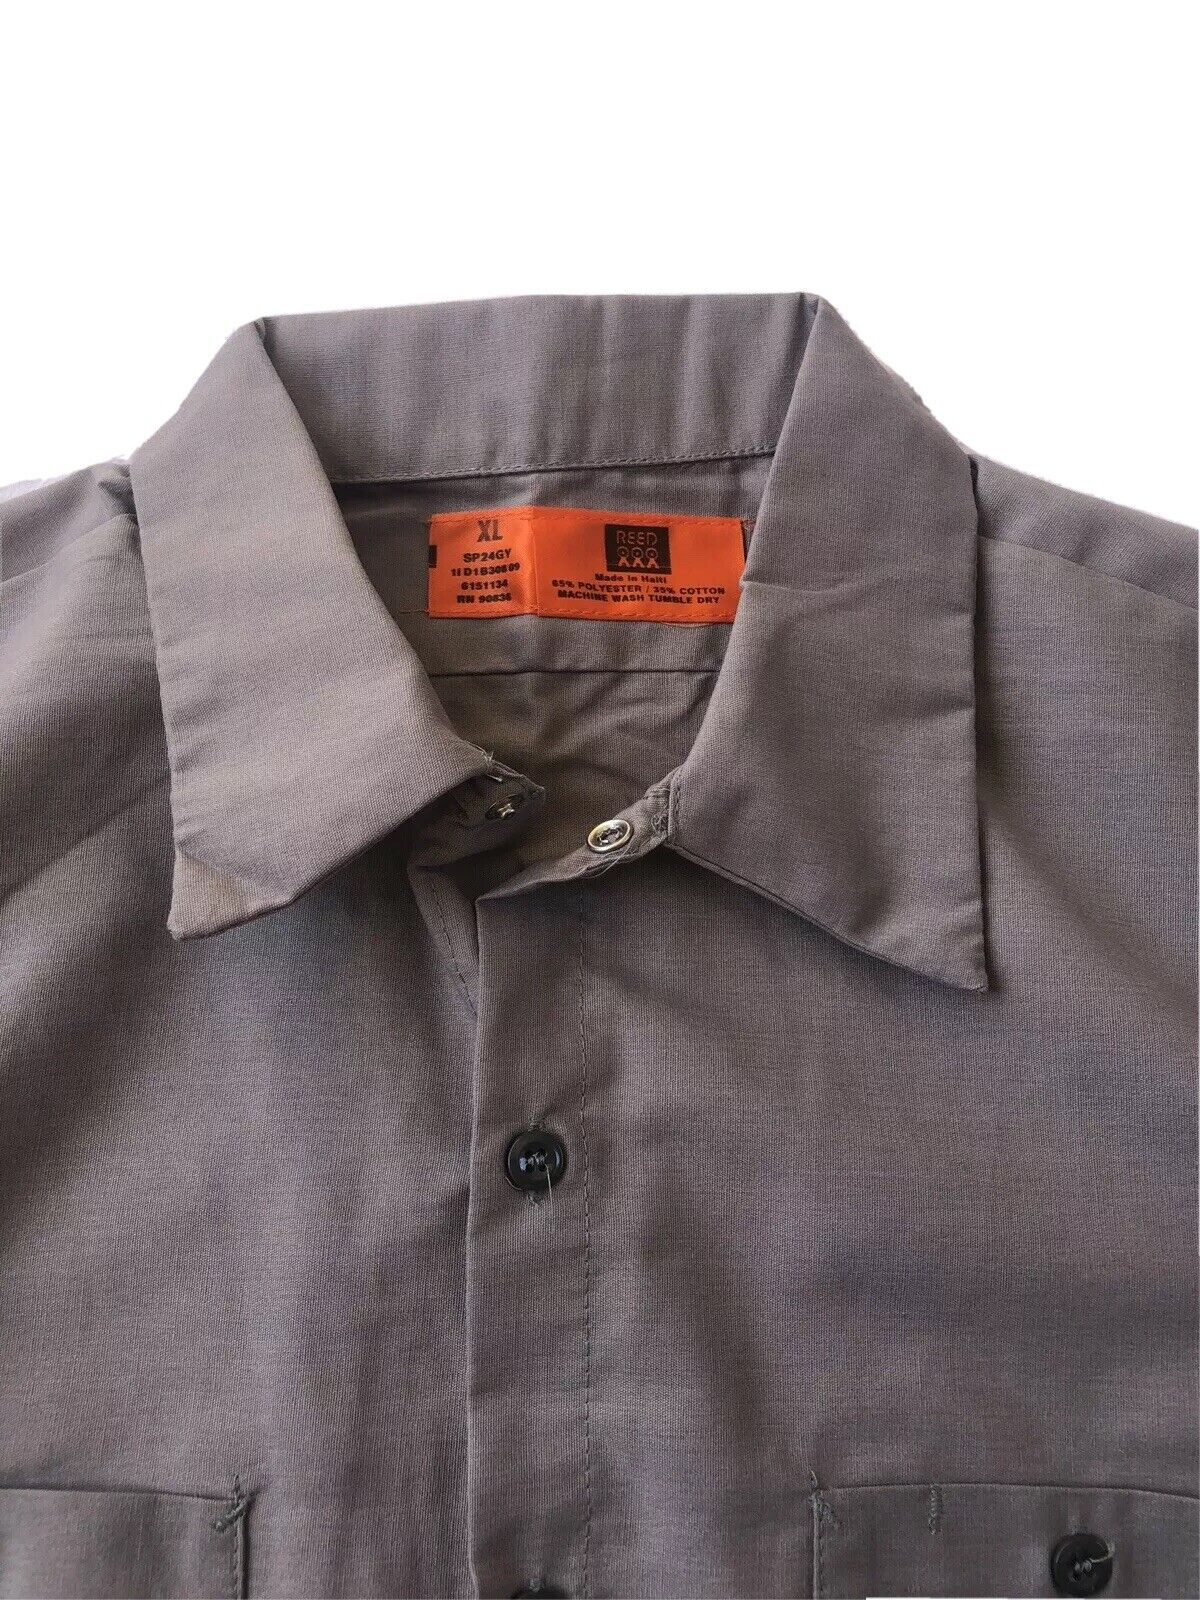 2 Work shirts Size 即納！最大半額！ Large Short Brand New #SP24GY Gray 最大88%OFFクーポン Sleeve